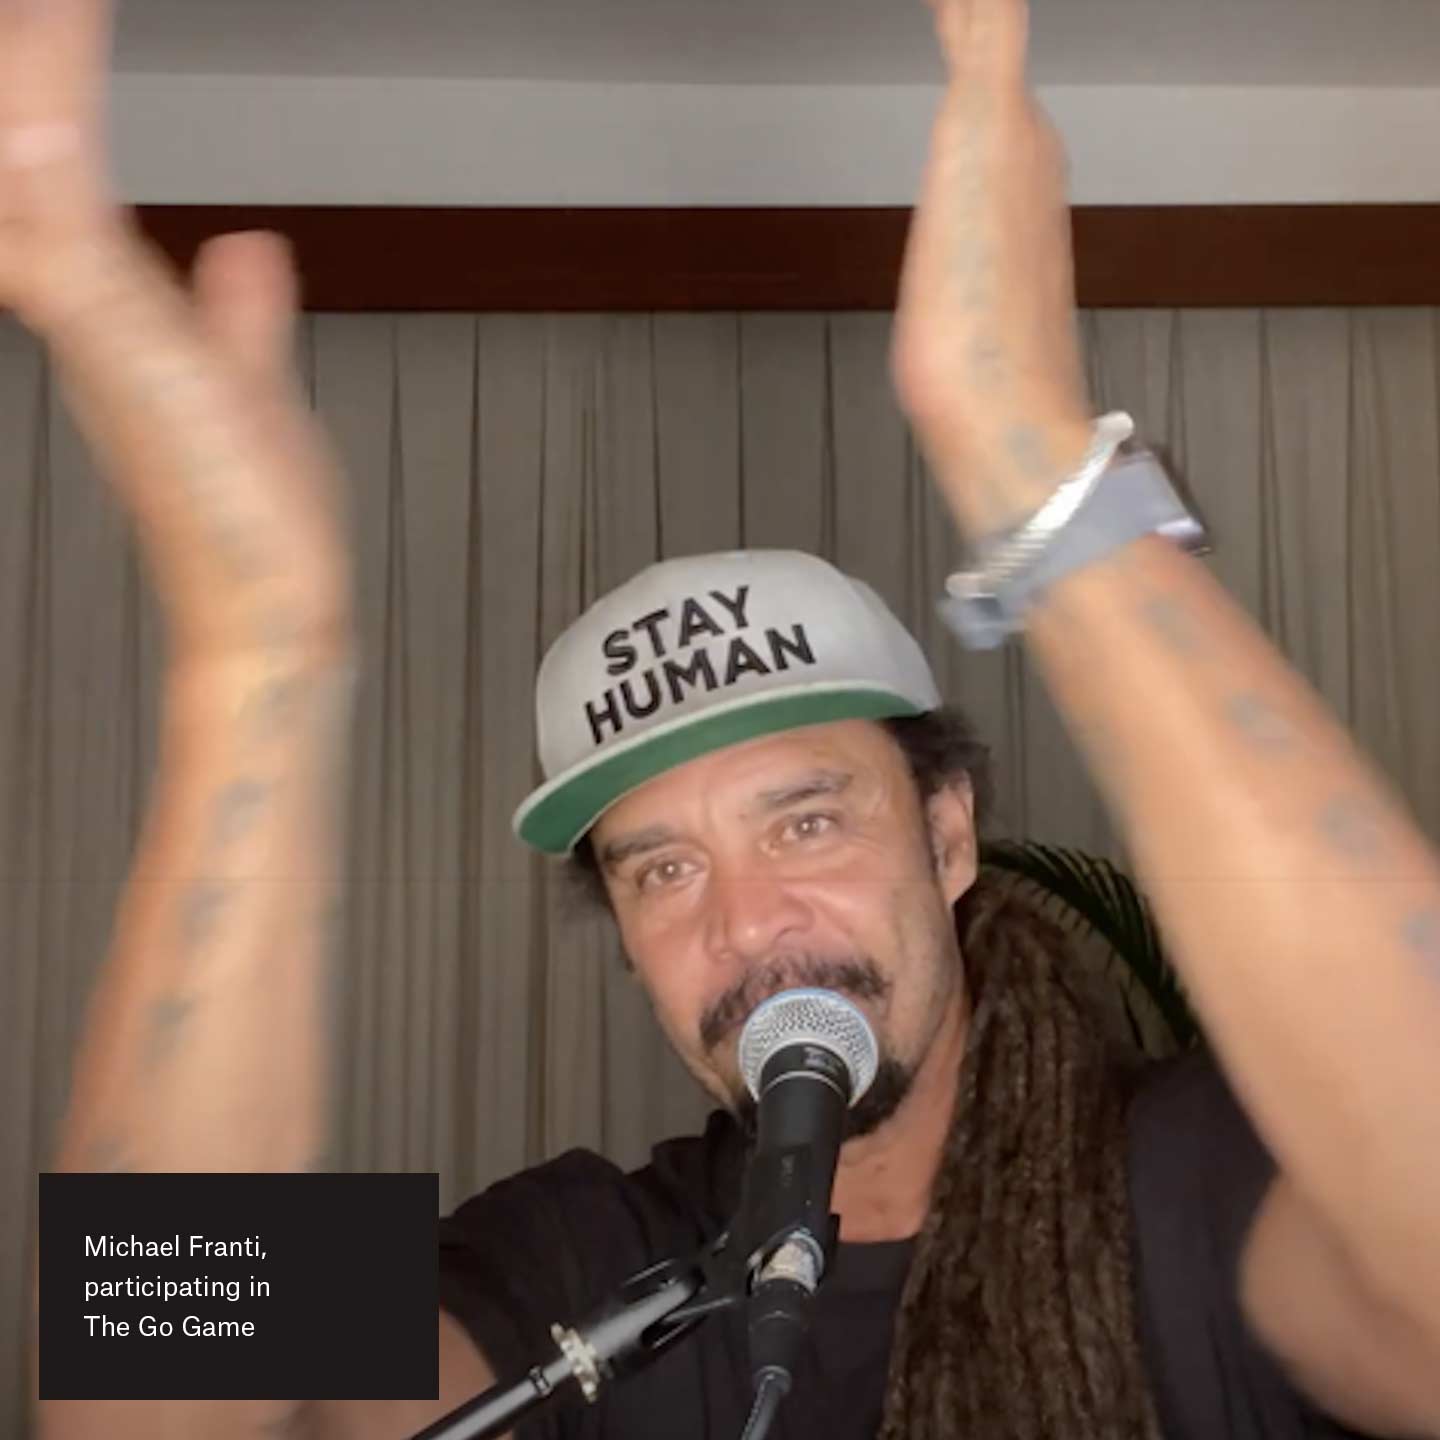 Michael Franti, deltager i The Go Game